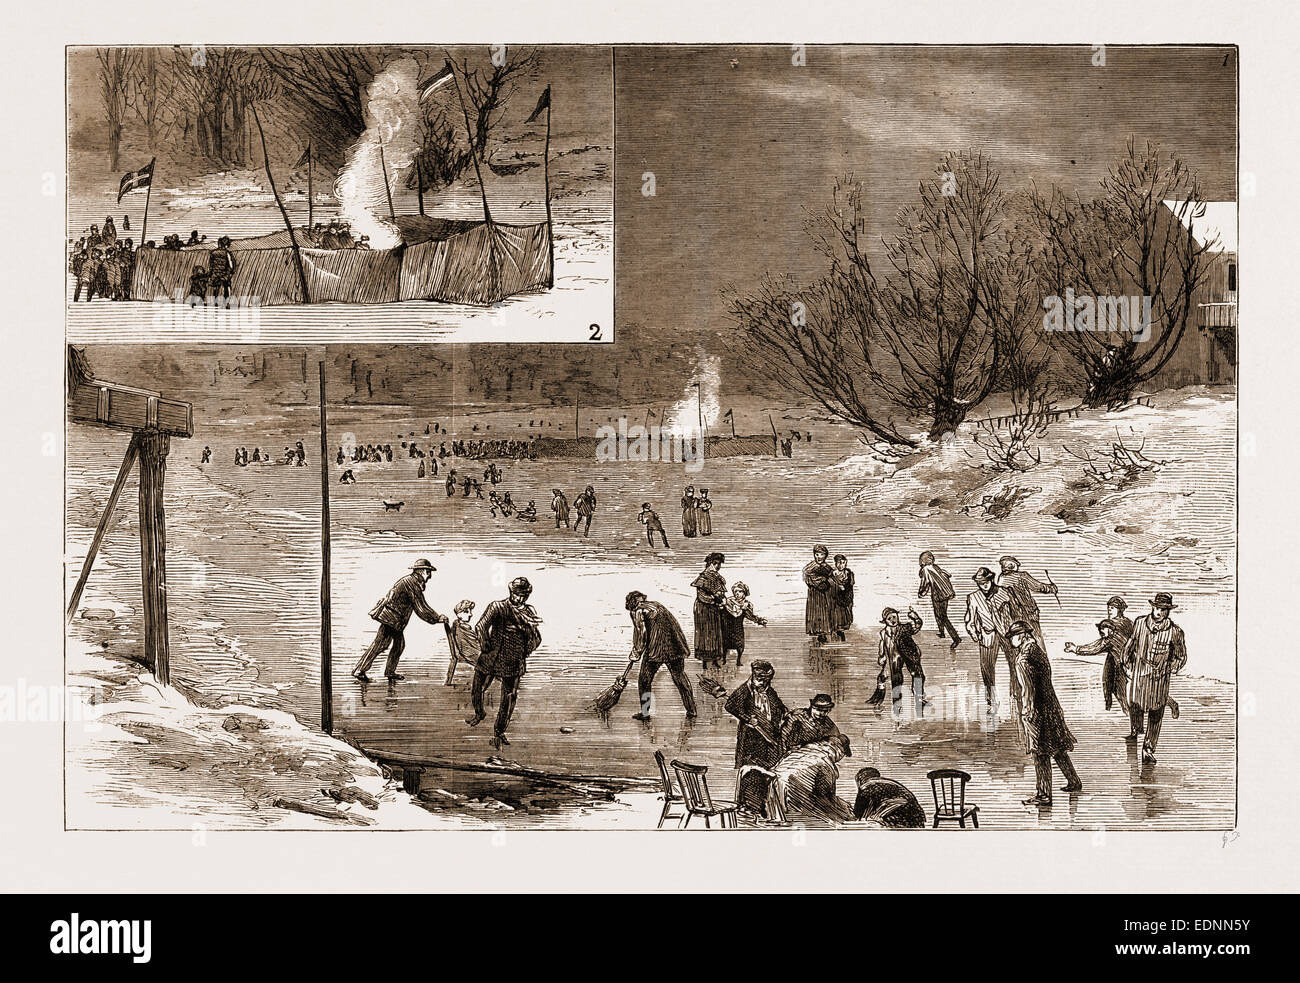 THE FROZEN THAMES AT TWICKENHAM, UK, 1881: 1. Skating on the River. 2. Roasting the Sheep. Stock Photo